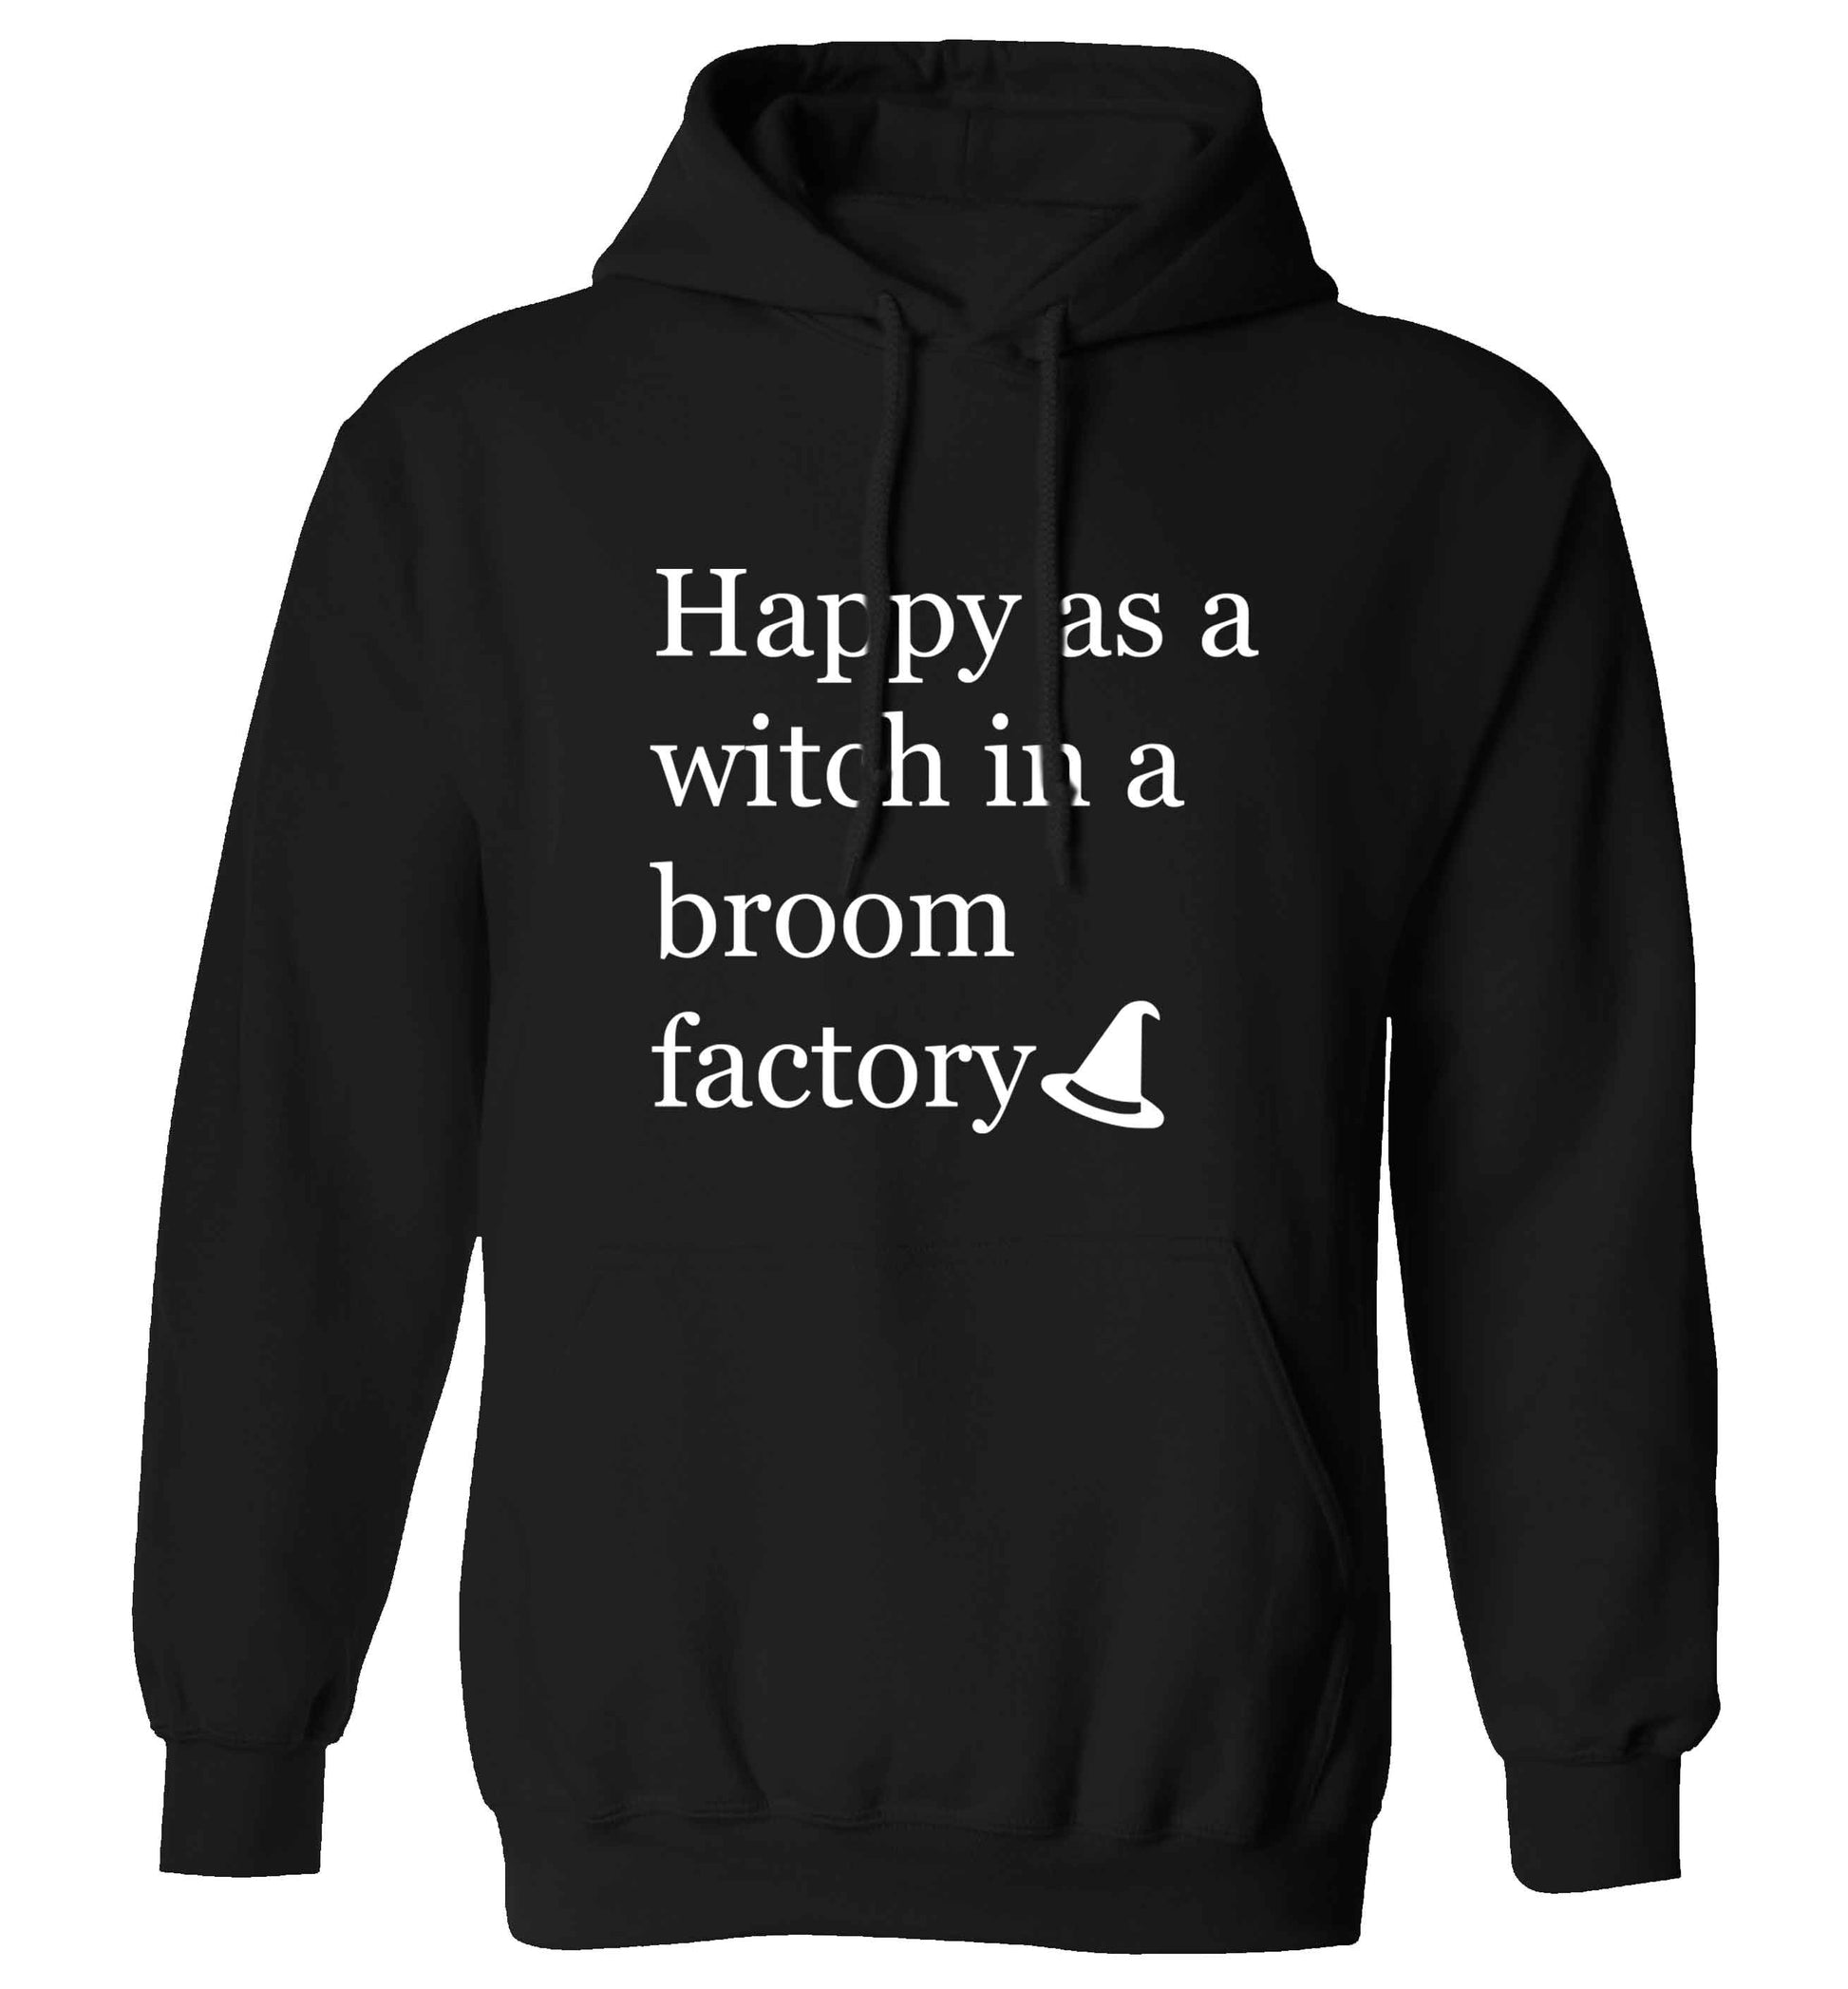 Happy as a witch in a broom factory adults unisex black hoodie 2XL